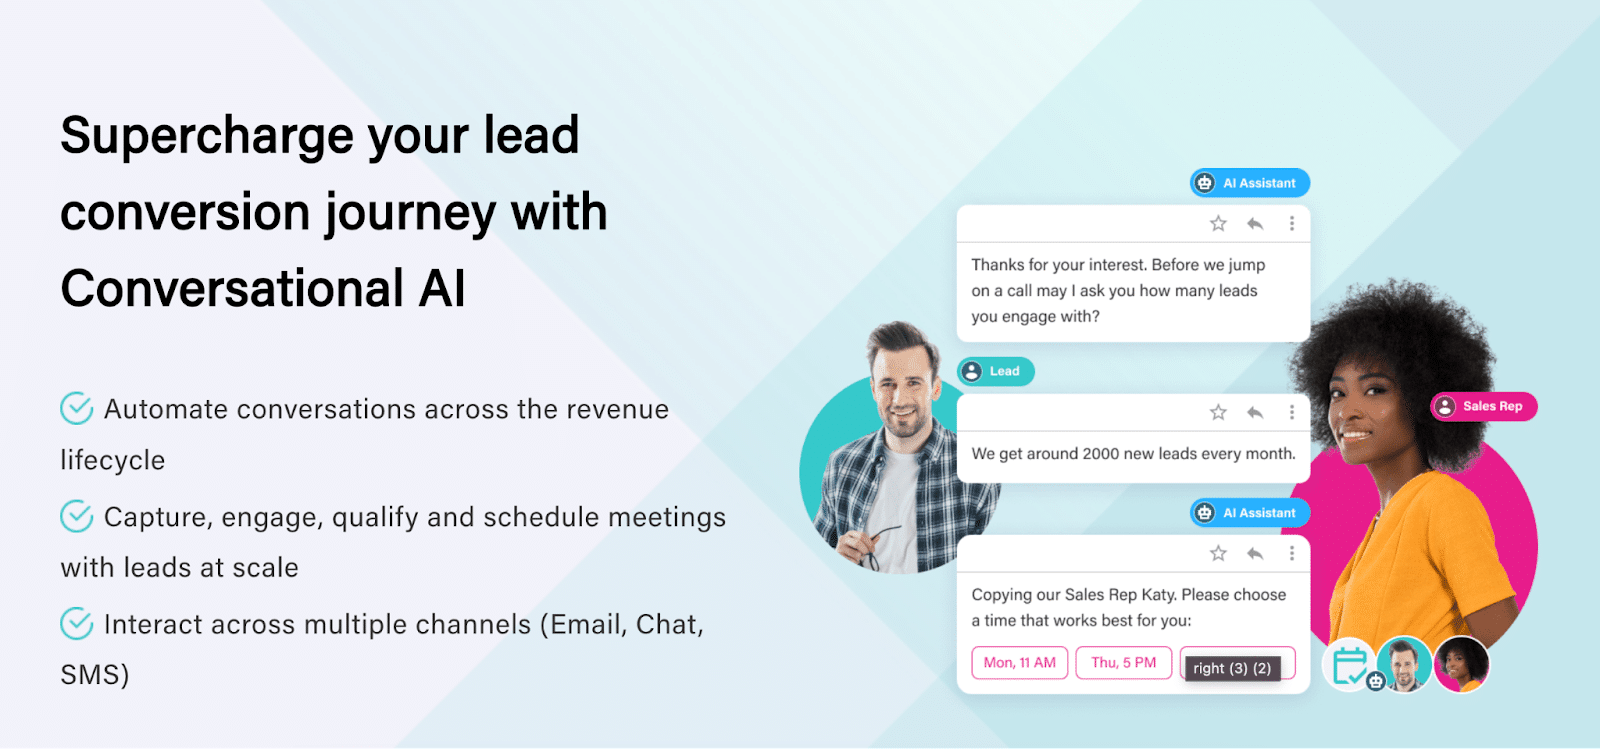 ExceedAI harnesses the power of conversational AI to automate entire revenue lifecycle conversations